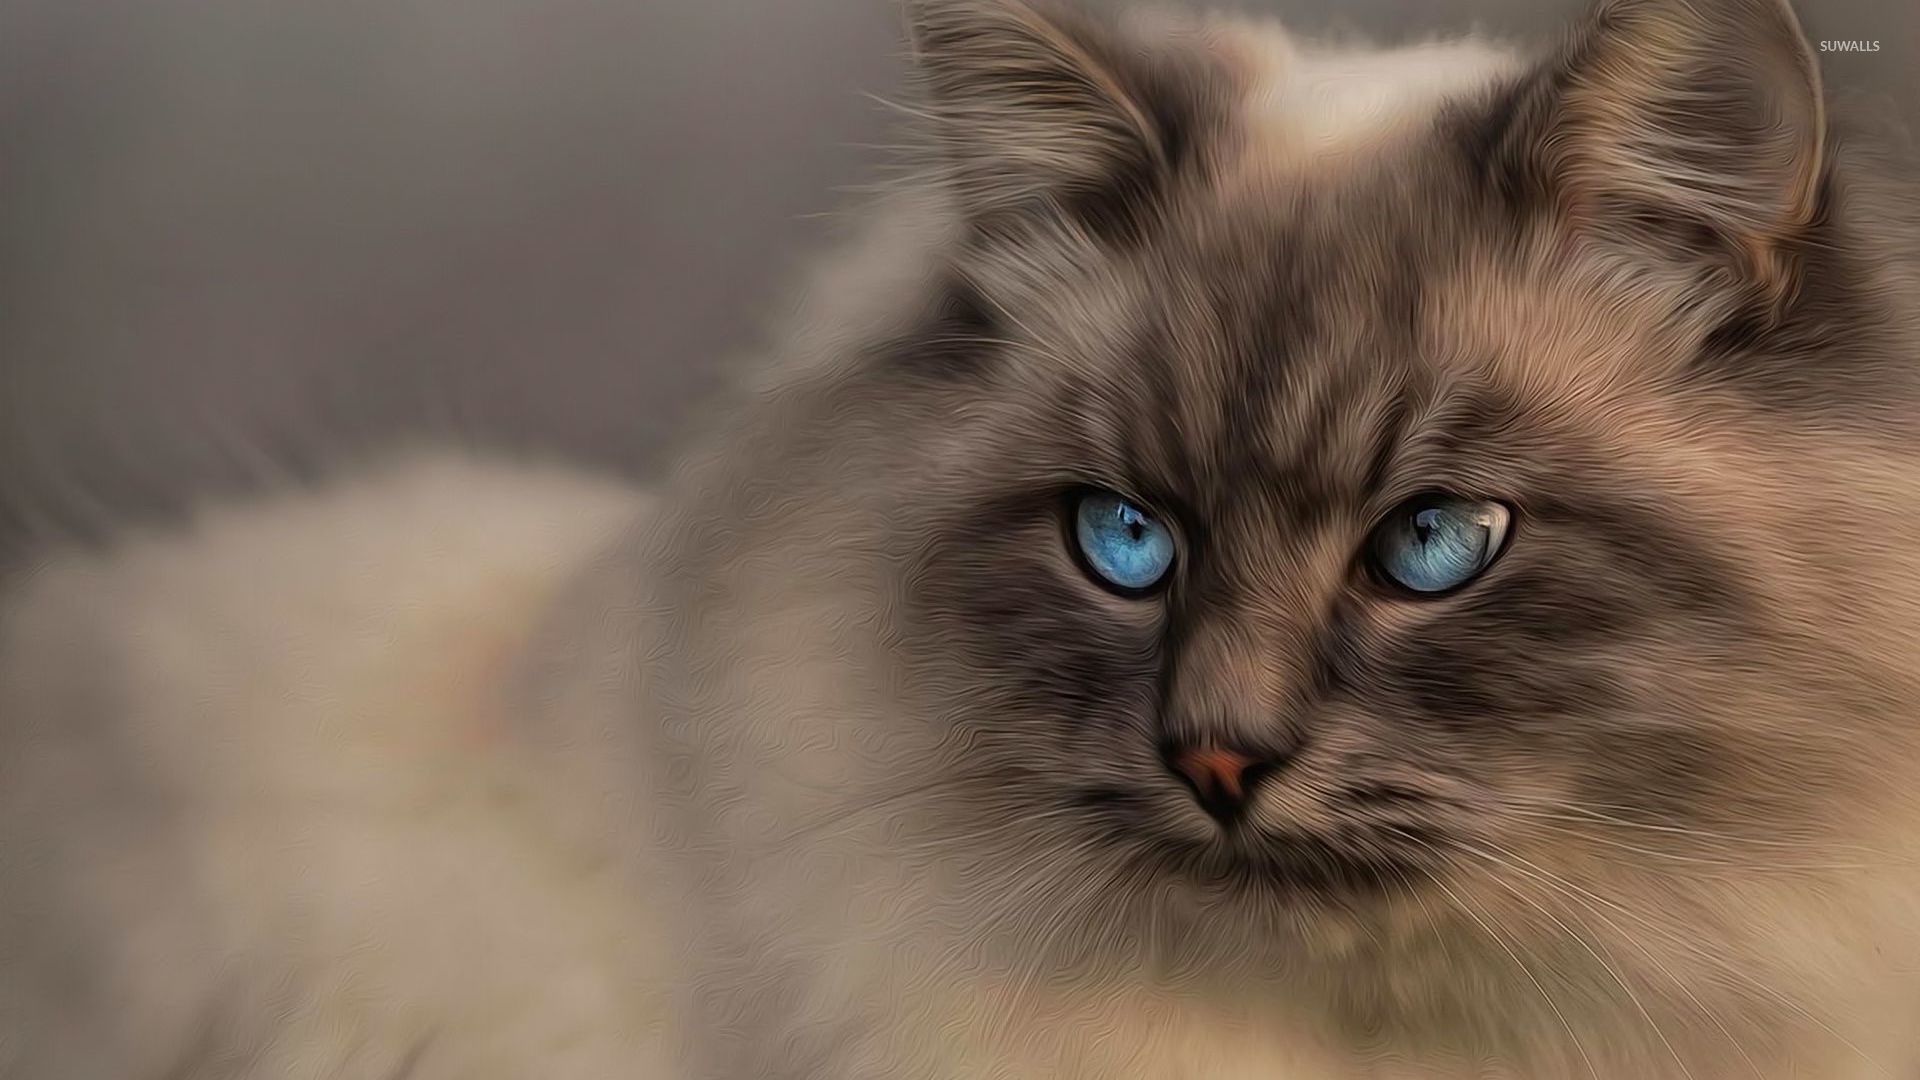 Cat with blue eyes wallpaper - Animal wallpapers - #32983